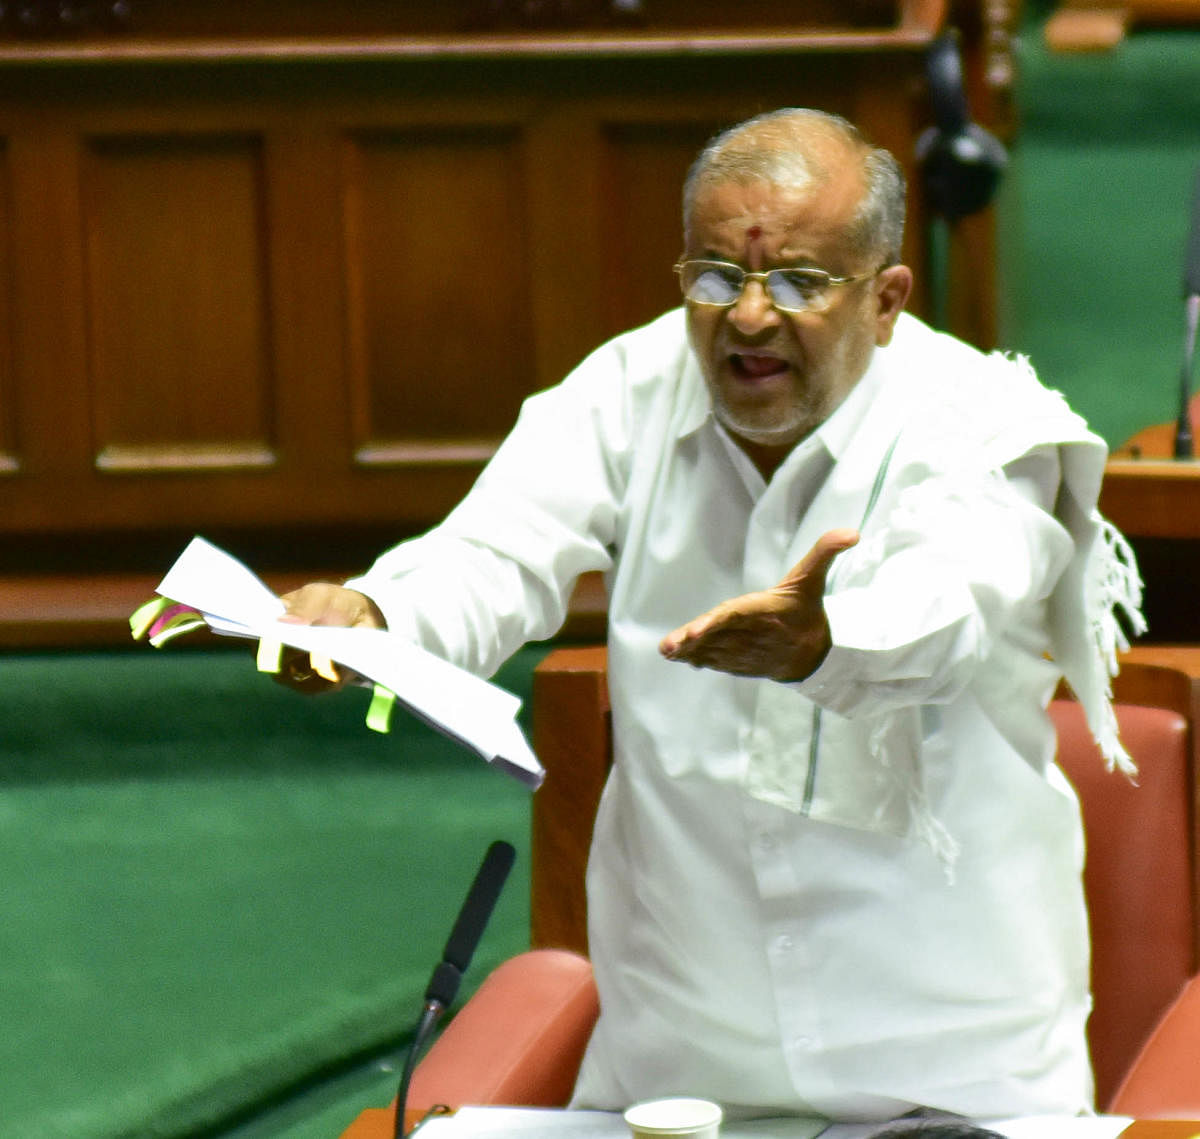 igher Education Minister G T Devegowda on Thursday said that his department would initiate action against private universities enrolling more students than the allotted strength. DH file photo